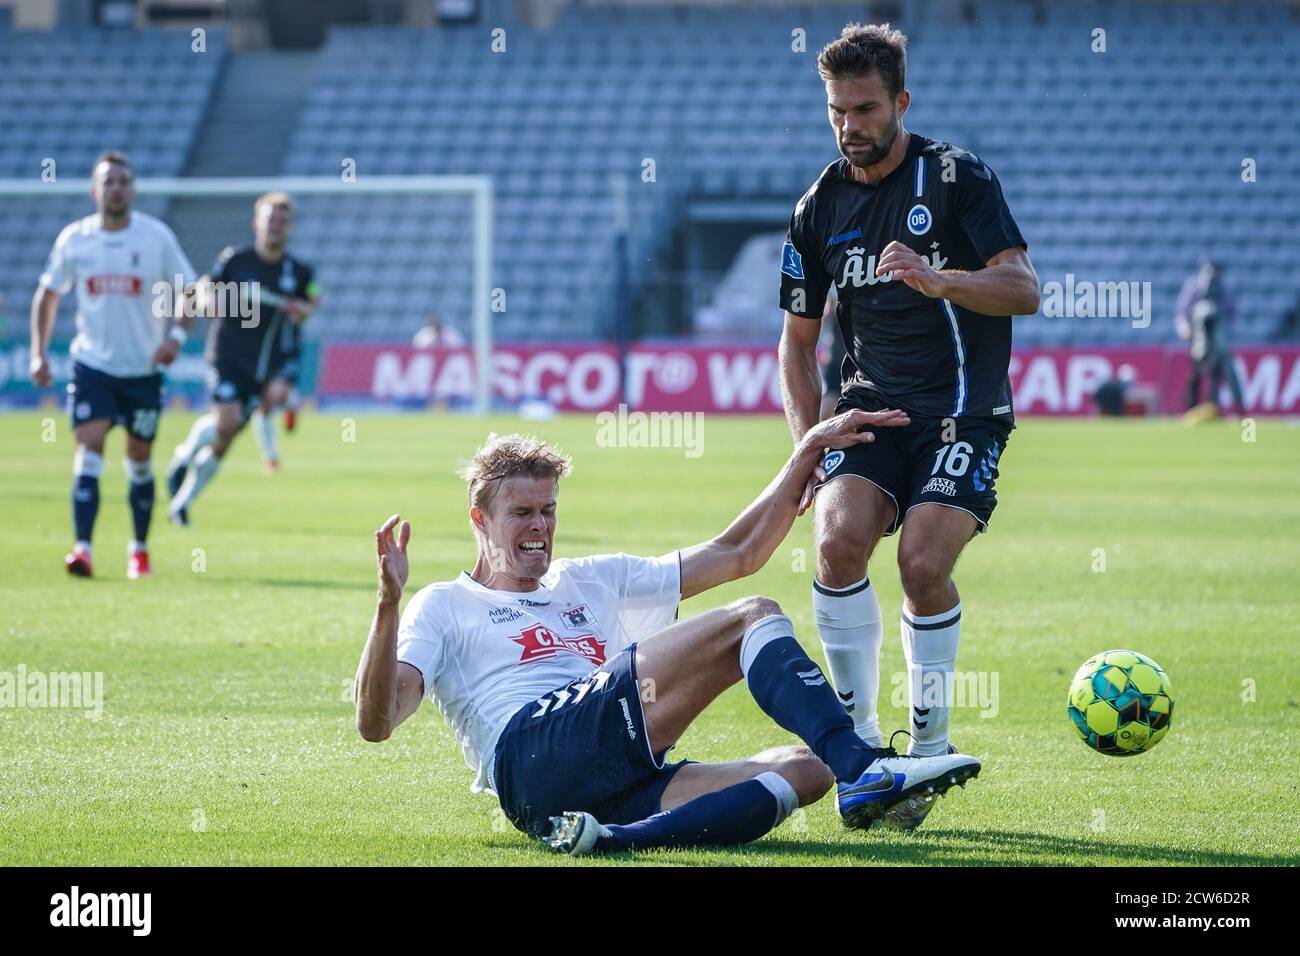 Aarhus, Denmark. 27th Sep, 2020. Frederik Tingager (5) of AGF and Jorgen  Skjelvik (16) of OB seen during the 3F Superliga match between Aarhus GF  and Odense Boldklub at Ceres Park in